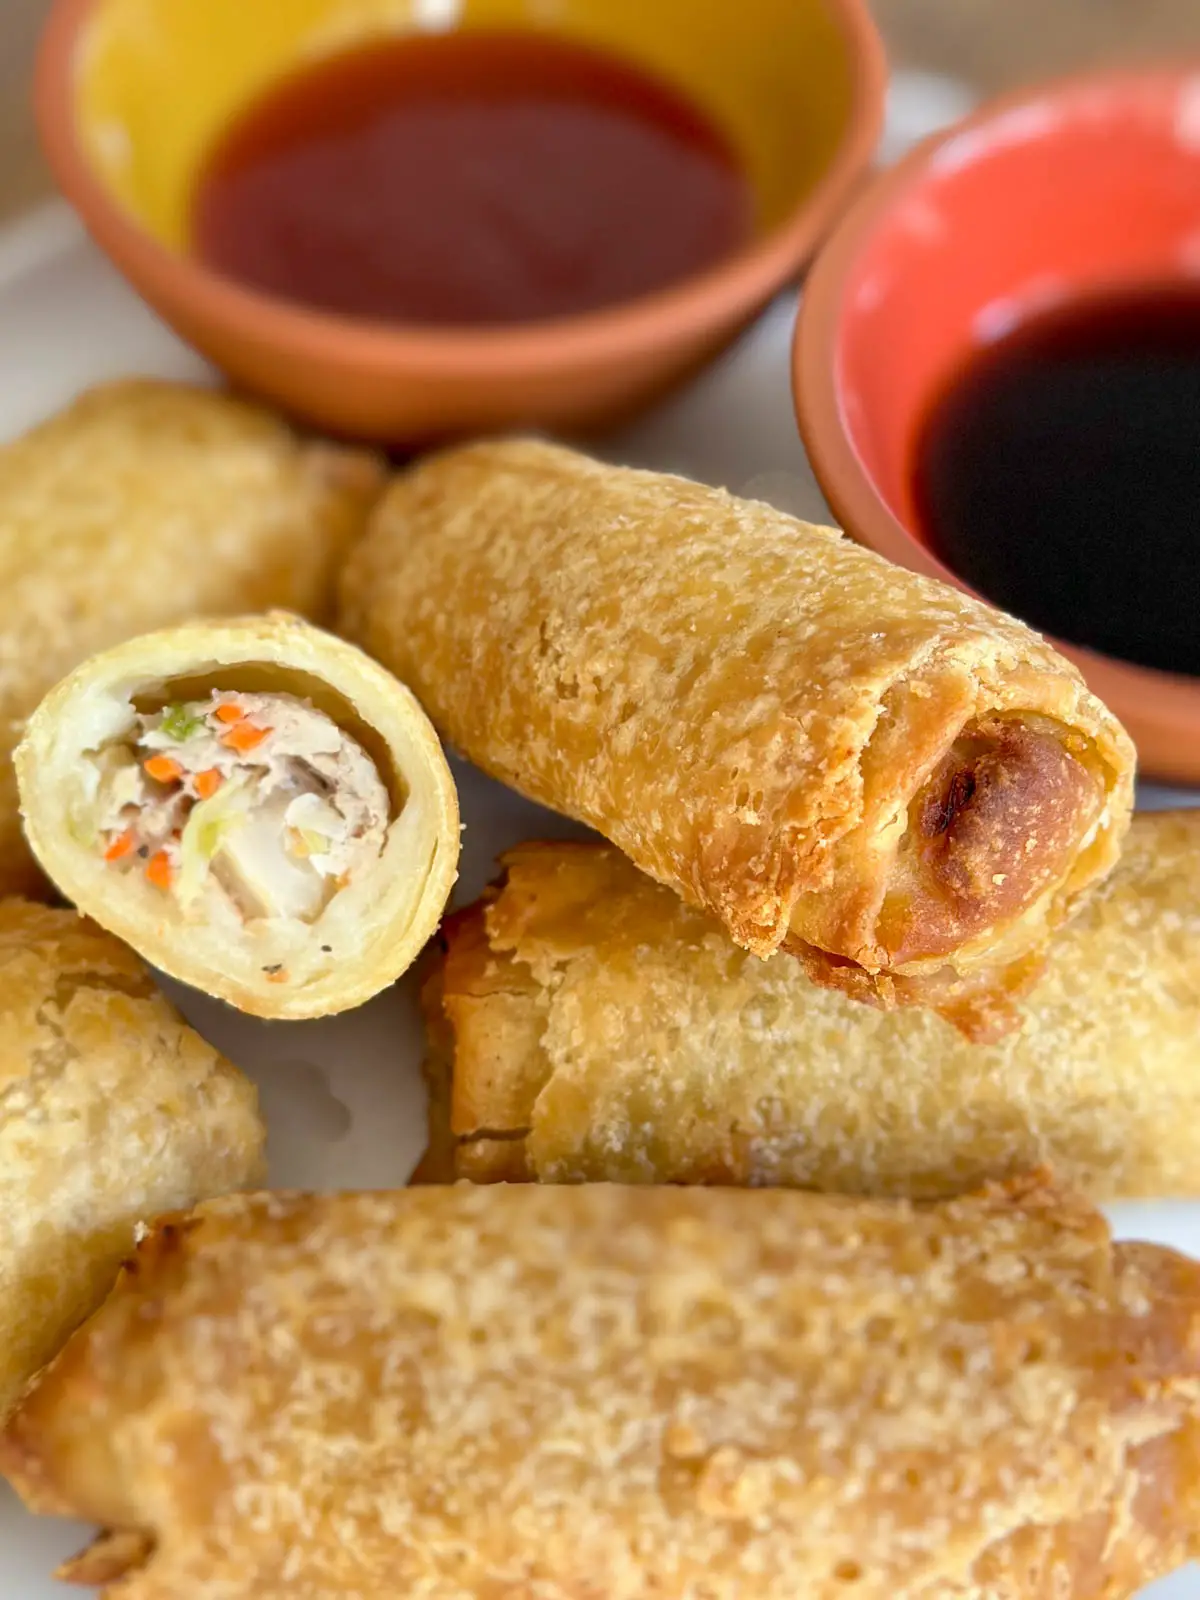 Cooked Egg rolls on a white plate. One is cut in half and there are 2 bowls with dipping sauces.